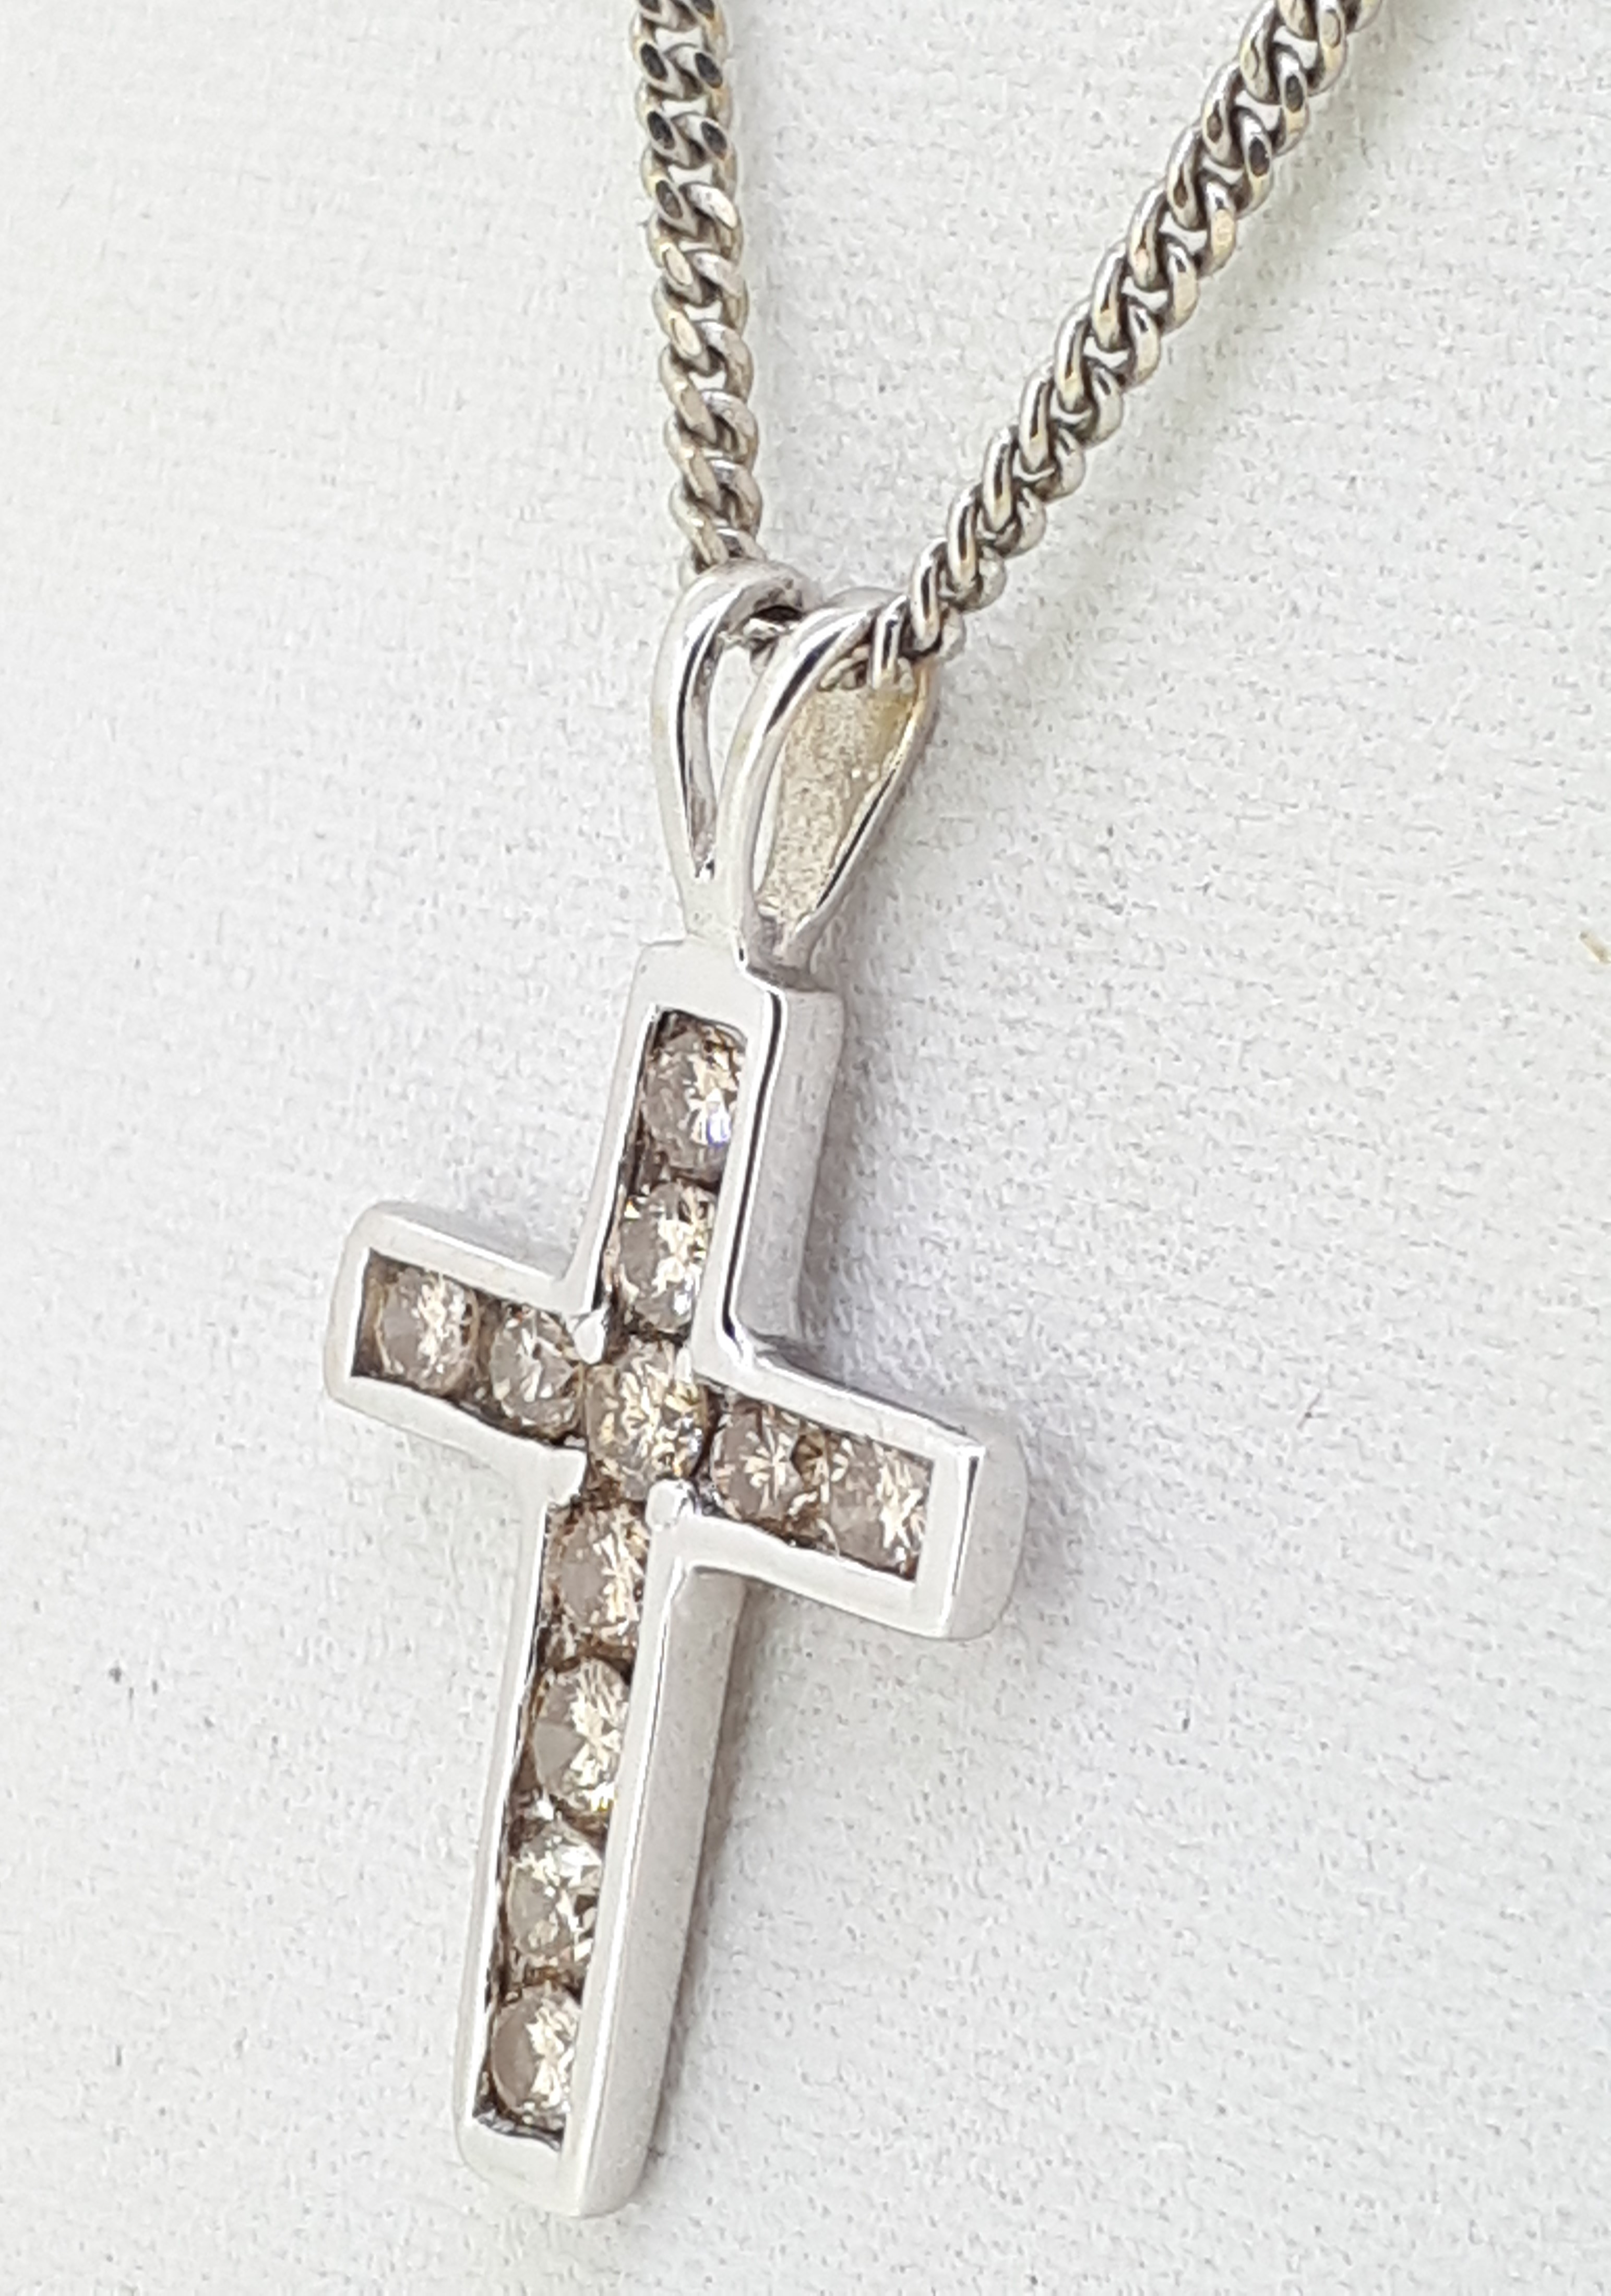 18ct (750) White Gold Diamond Cross Pendant and 16" Curb Chain Necklace - Image 2 of 3